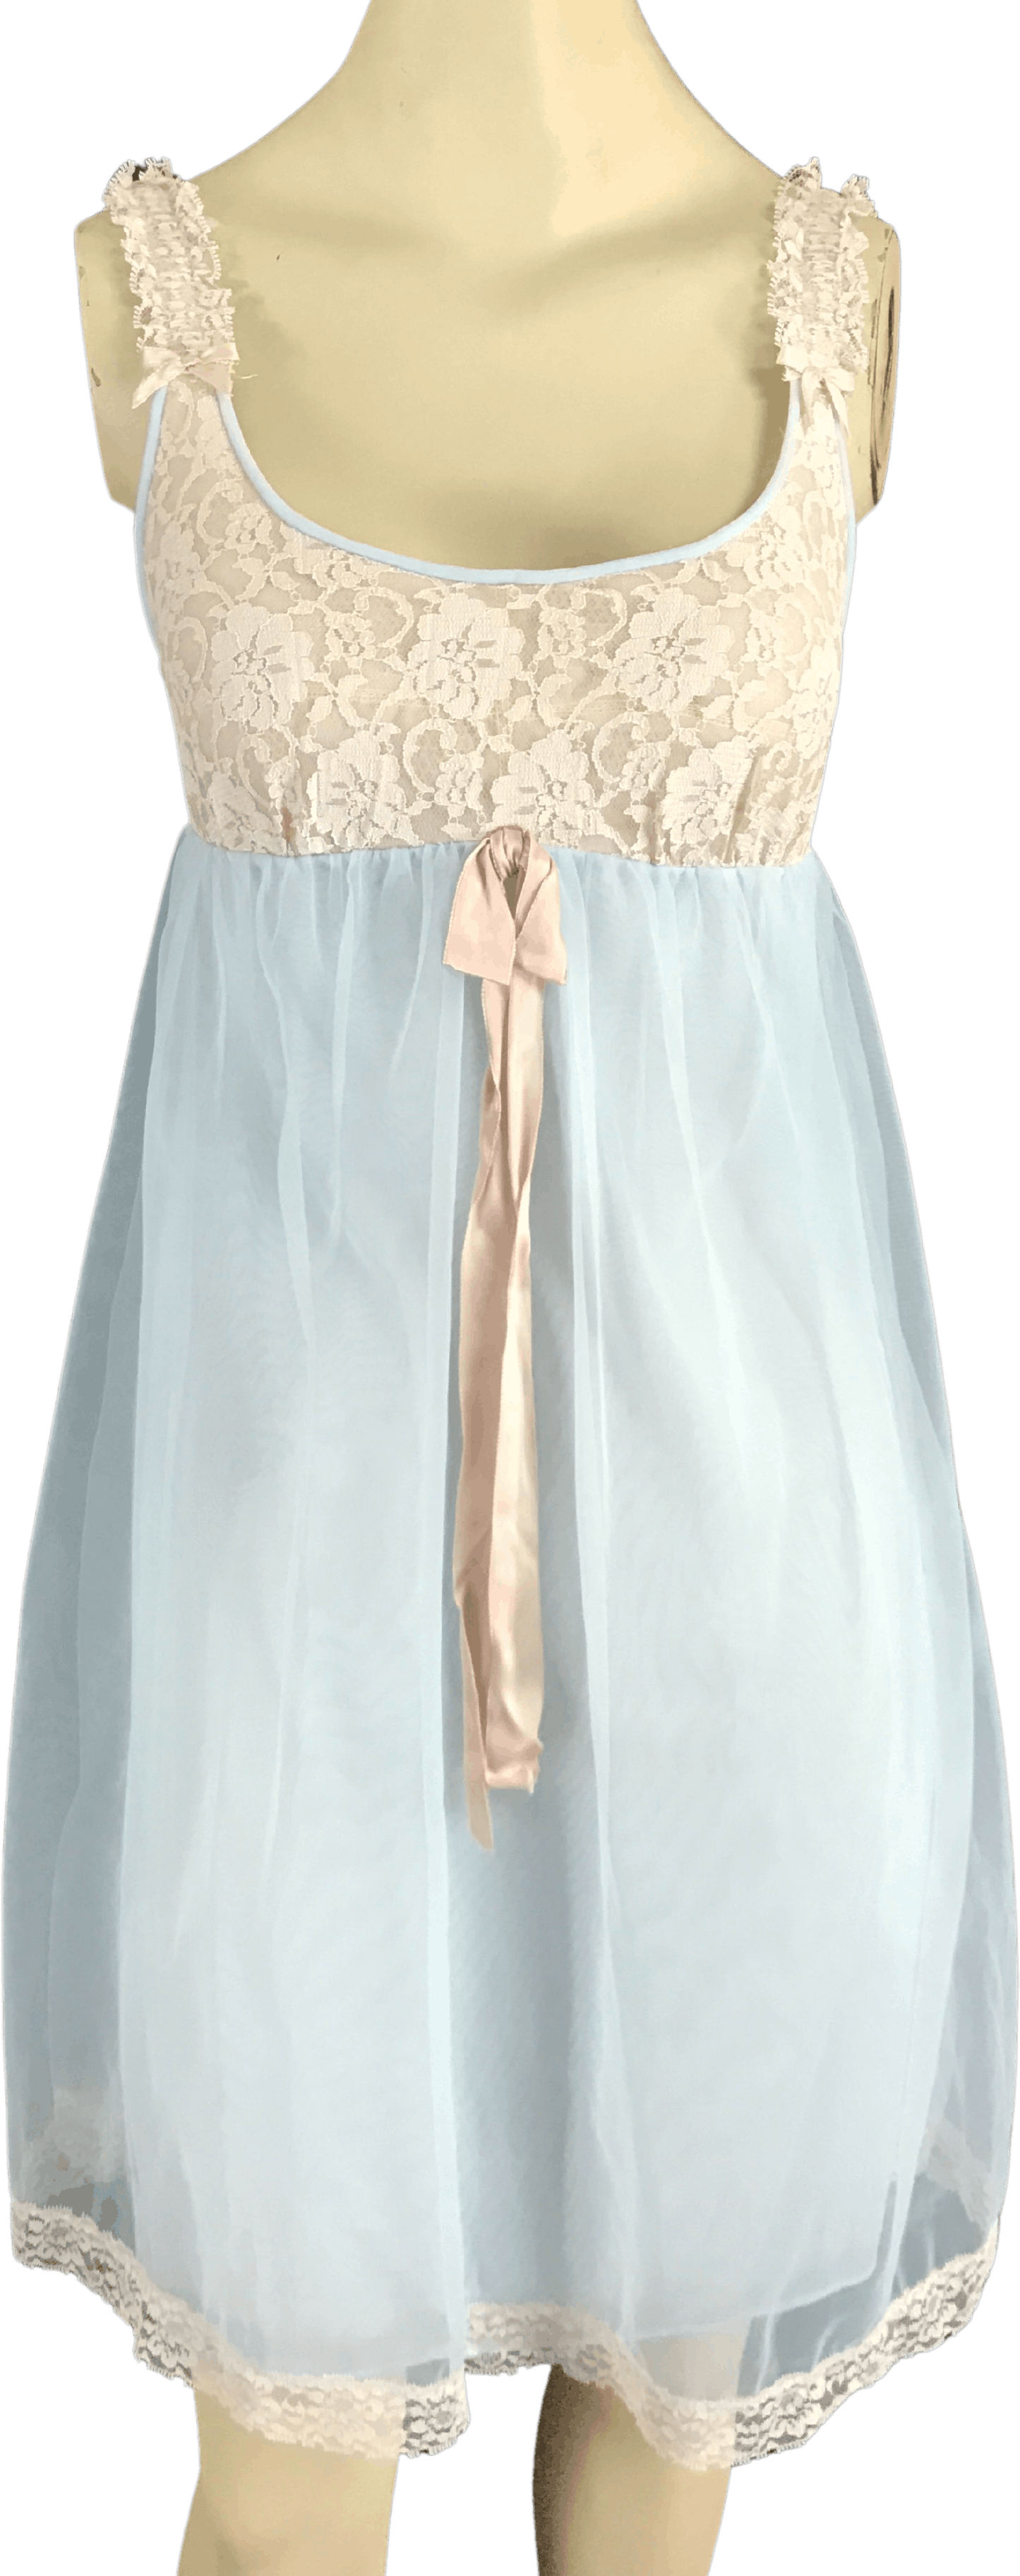 Vintage 60's/70's Baby Blue Chiffon Lace Nightgown by Gaymode Penneys ...